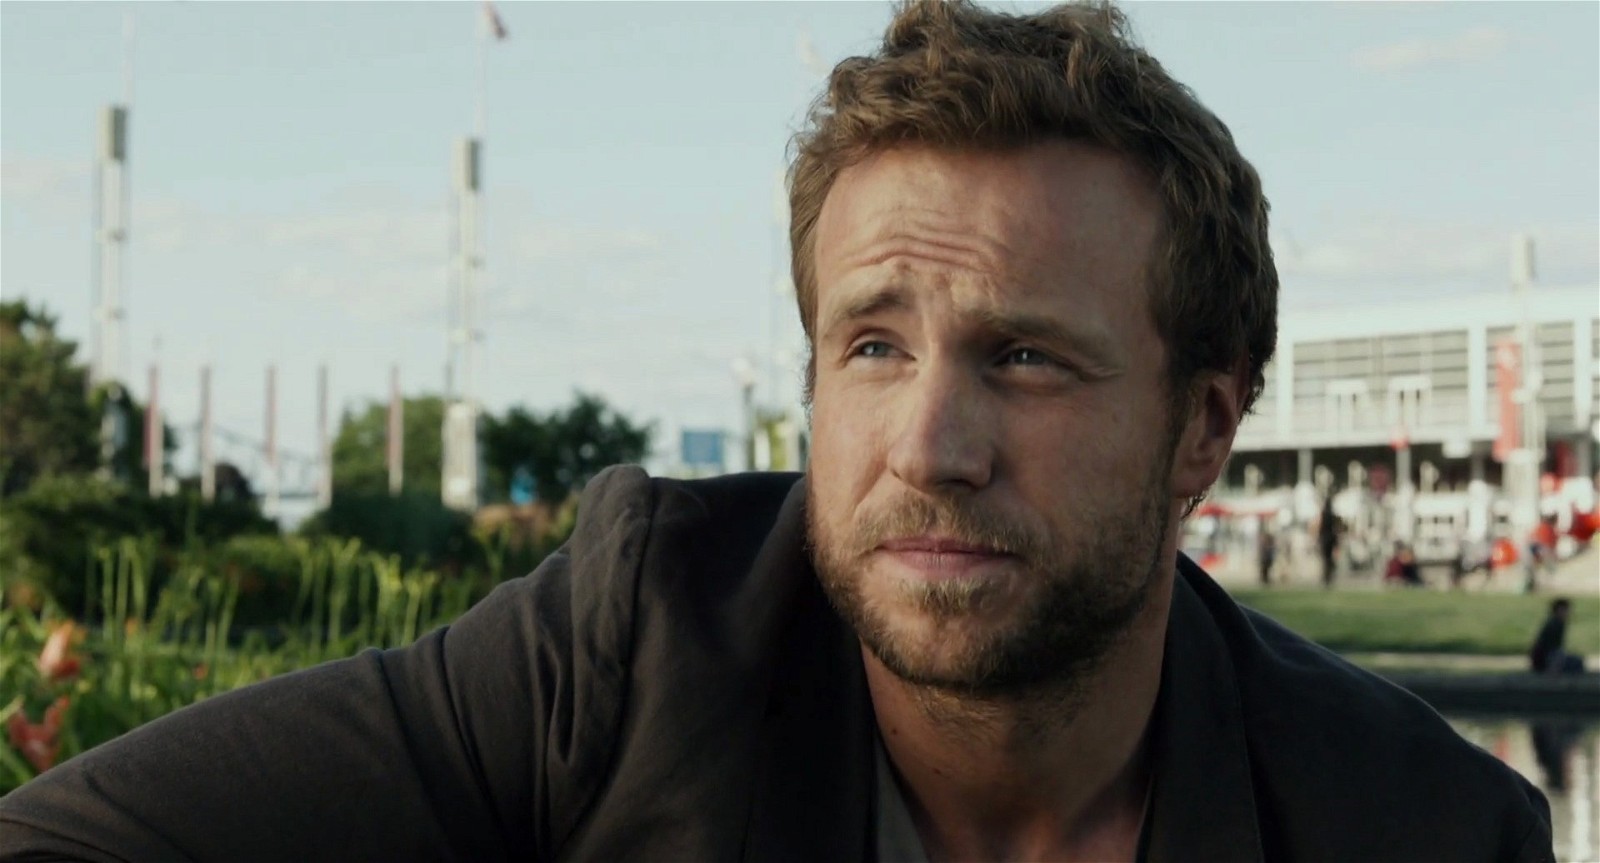 Rafe Spall in Life of Pi